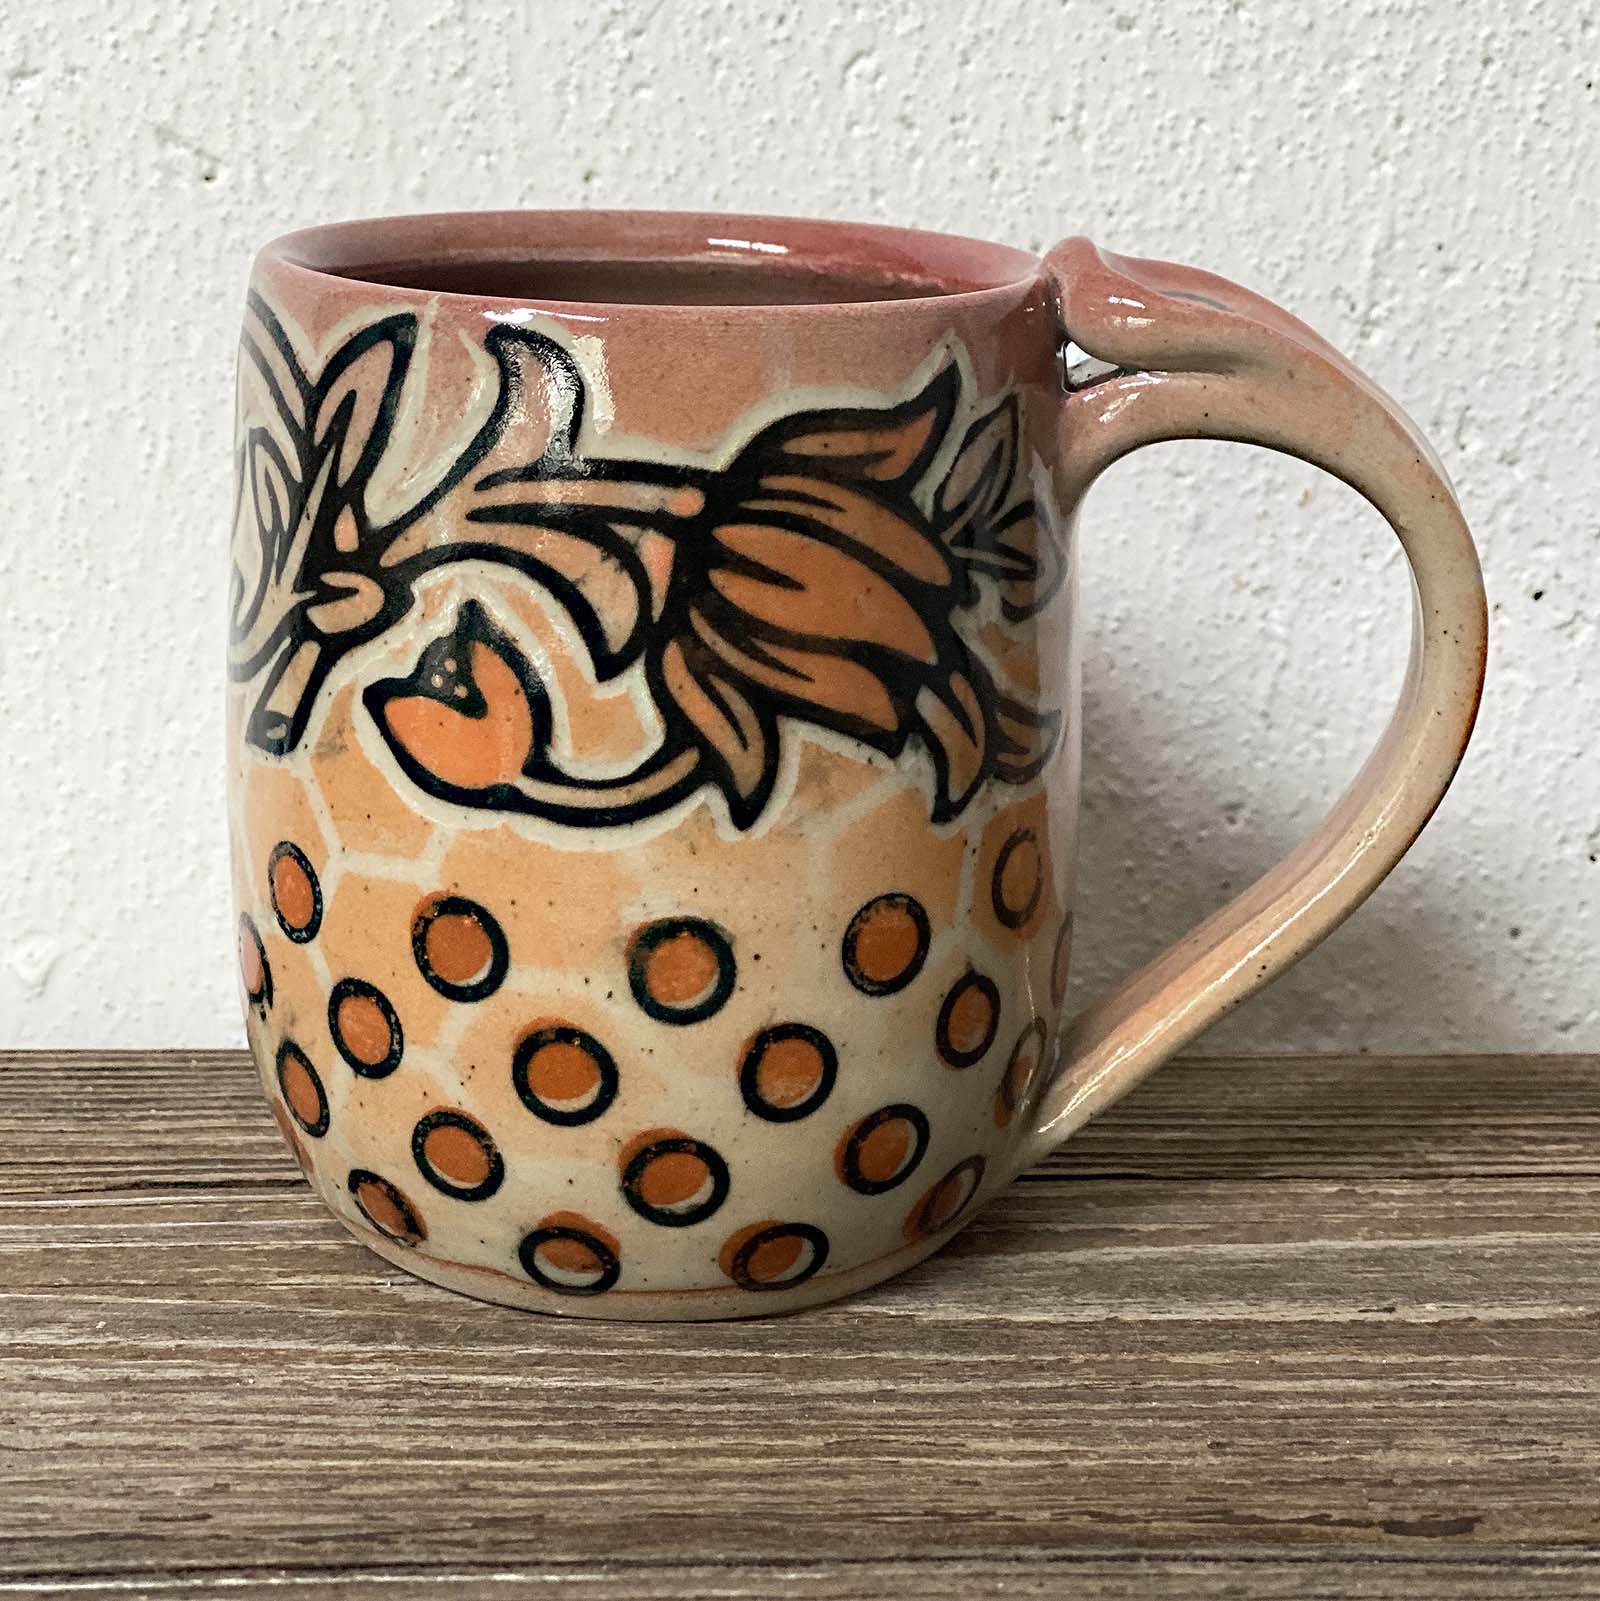 Melynn Allen, mug 1, 4 in. (10 cm) in height, white stoneware, fired to cone 10, 2021.